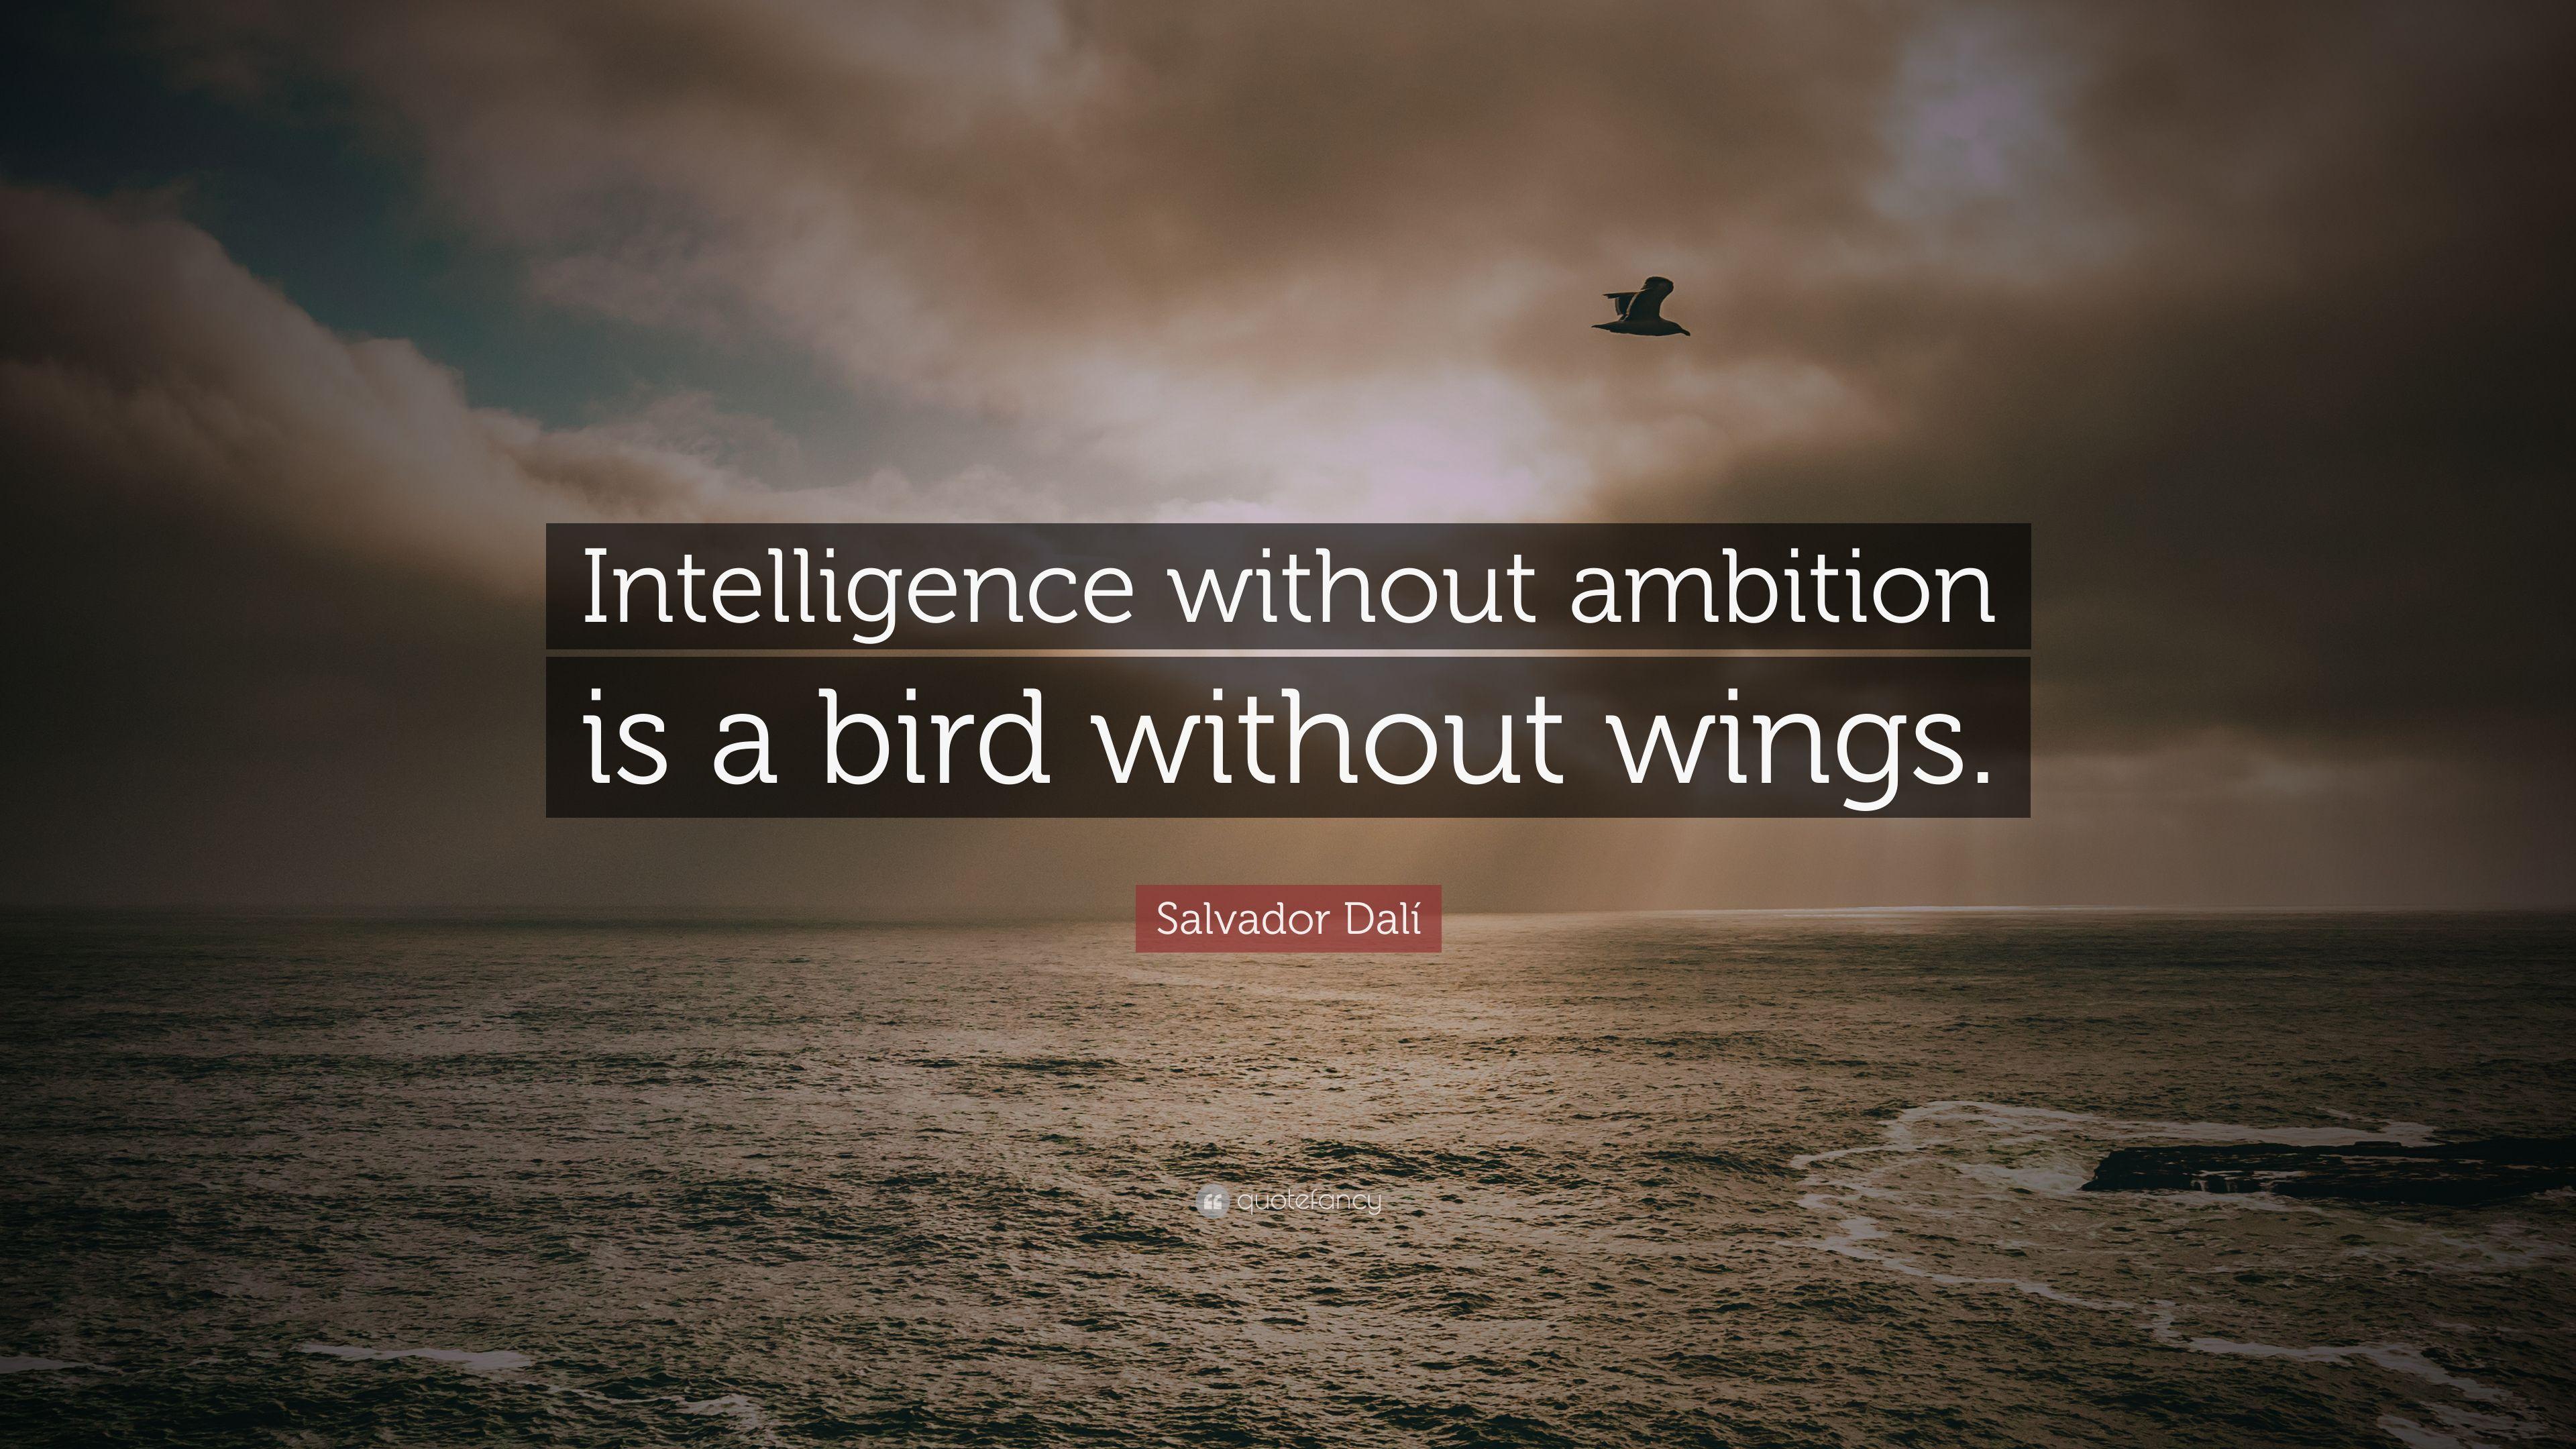 Salvador Dalí Quote: “Intelligence without ambition is a bird